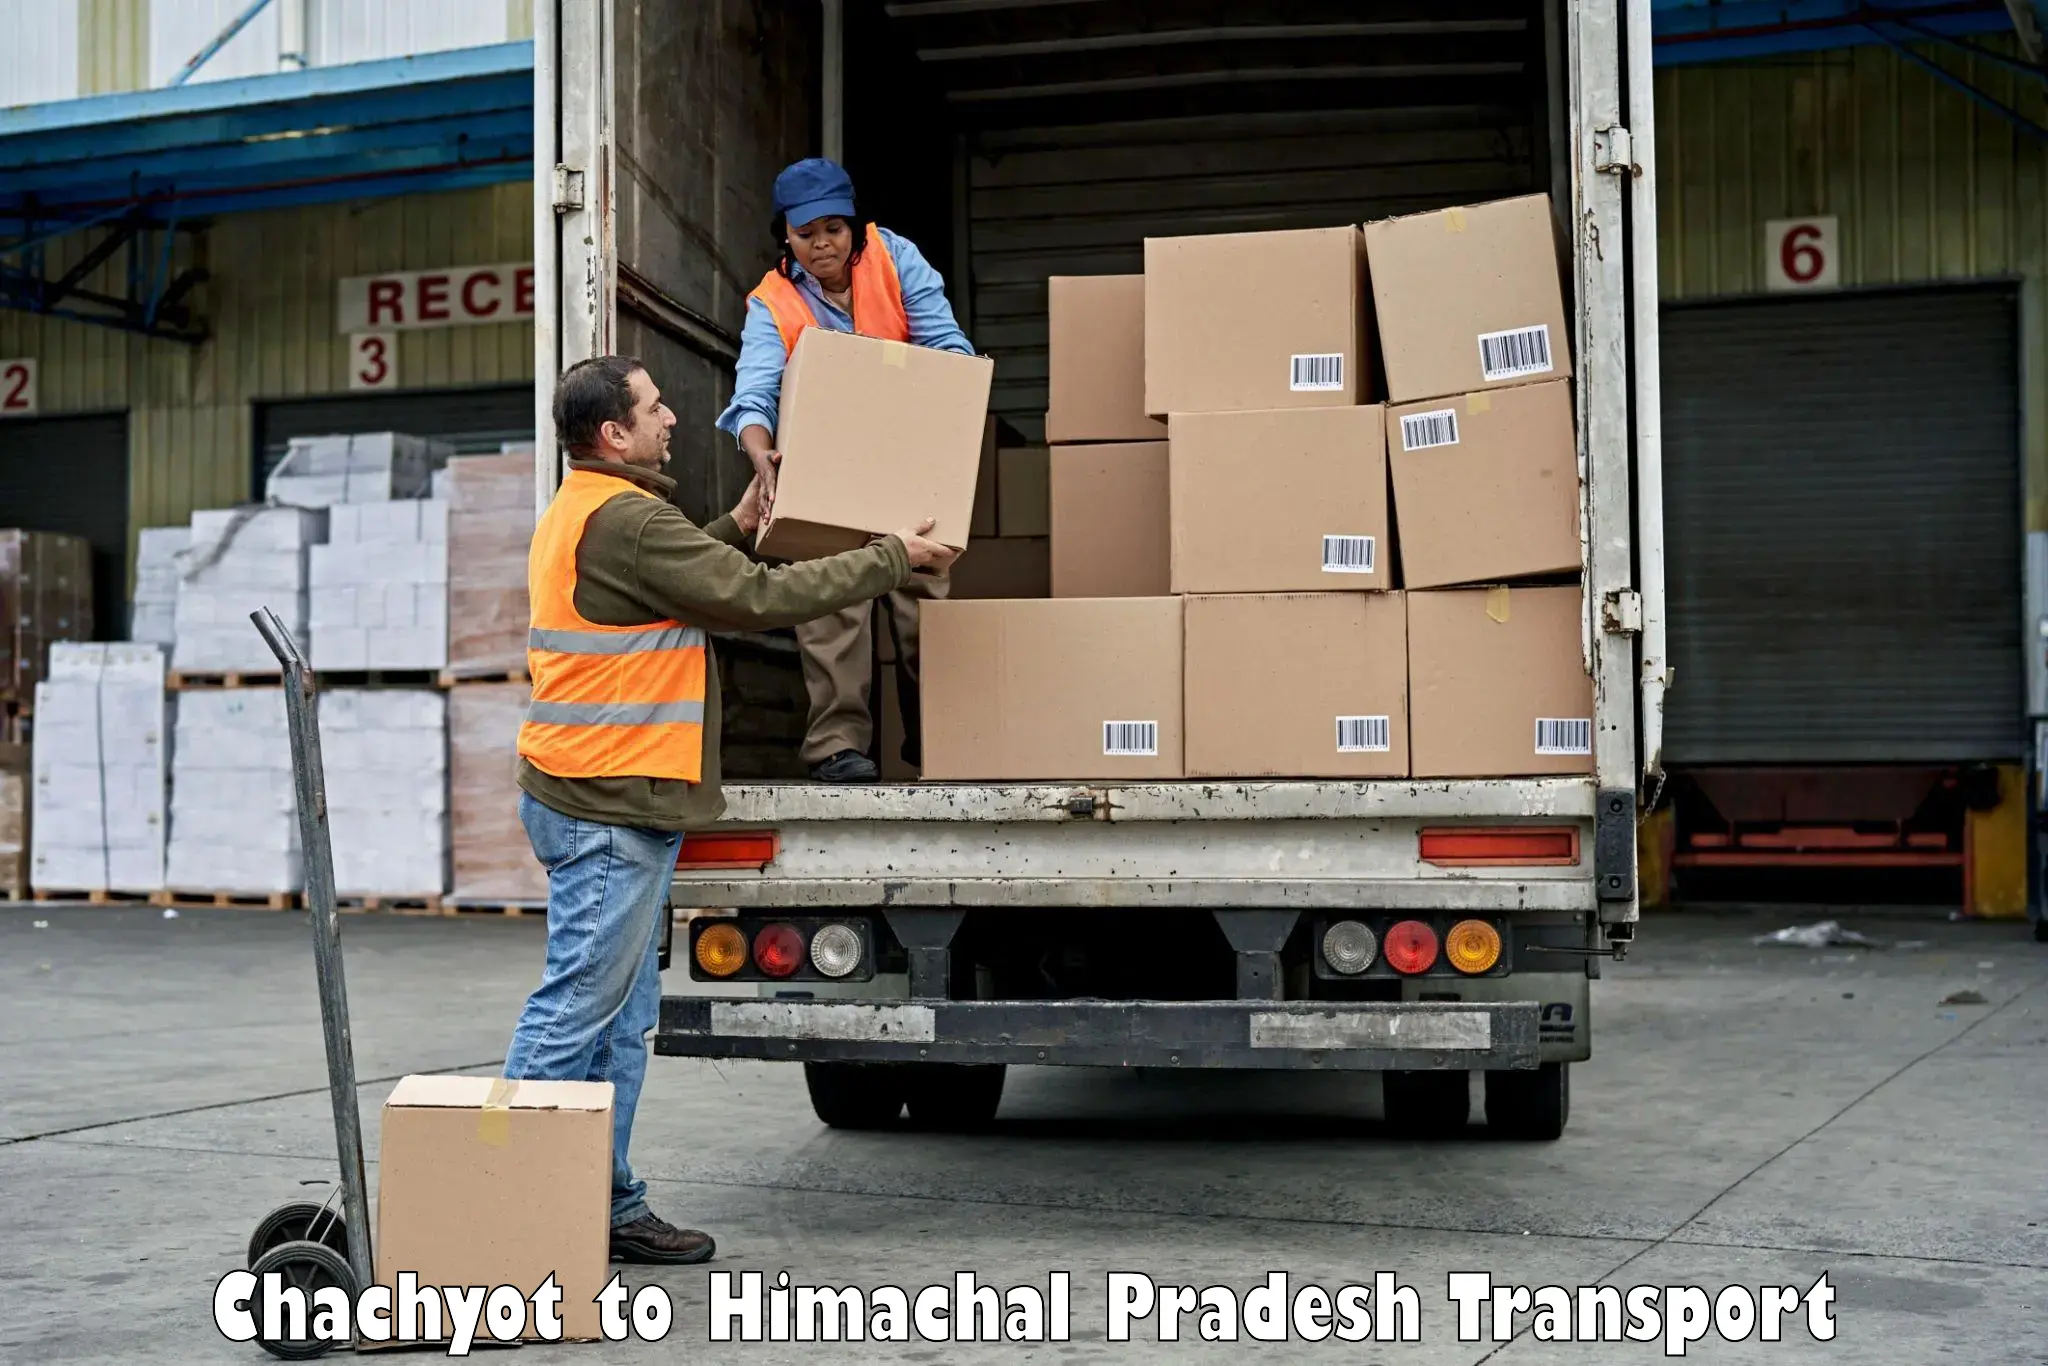 Truck transport companies in India in Chachyot to Jaisinghpur